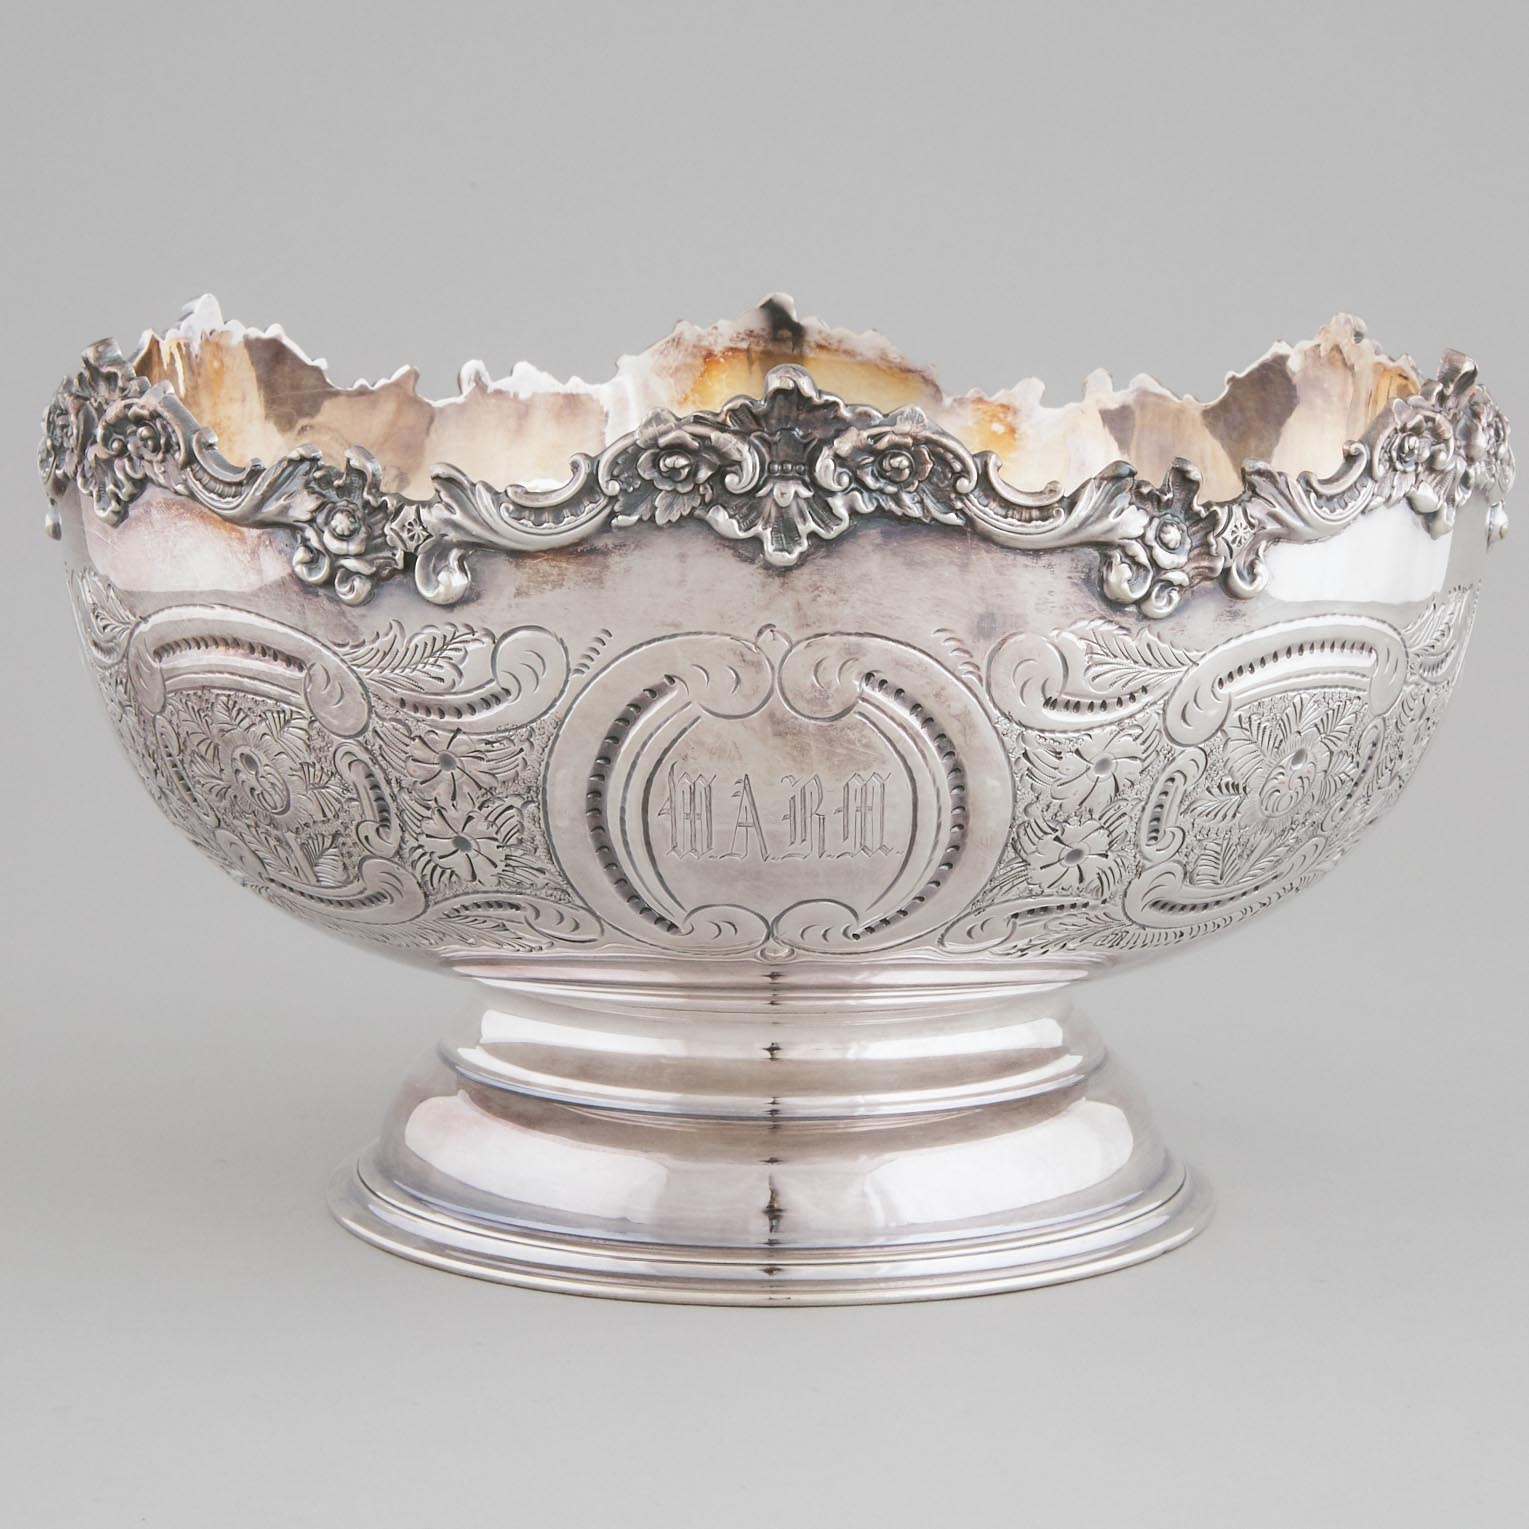 English 'Cavendish' Silver Plated Footed Bowl, 20th century